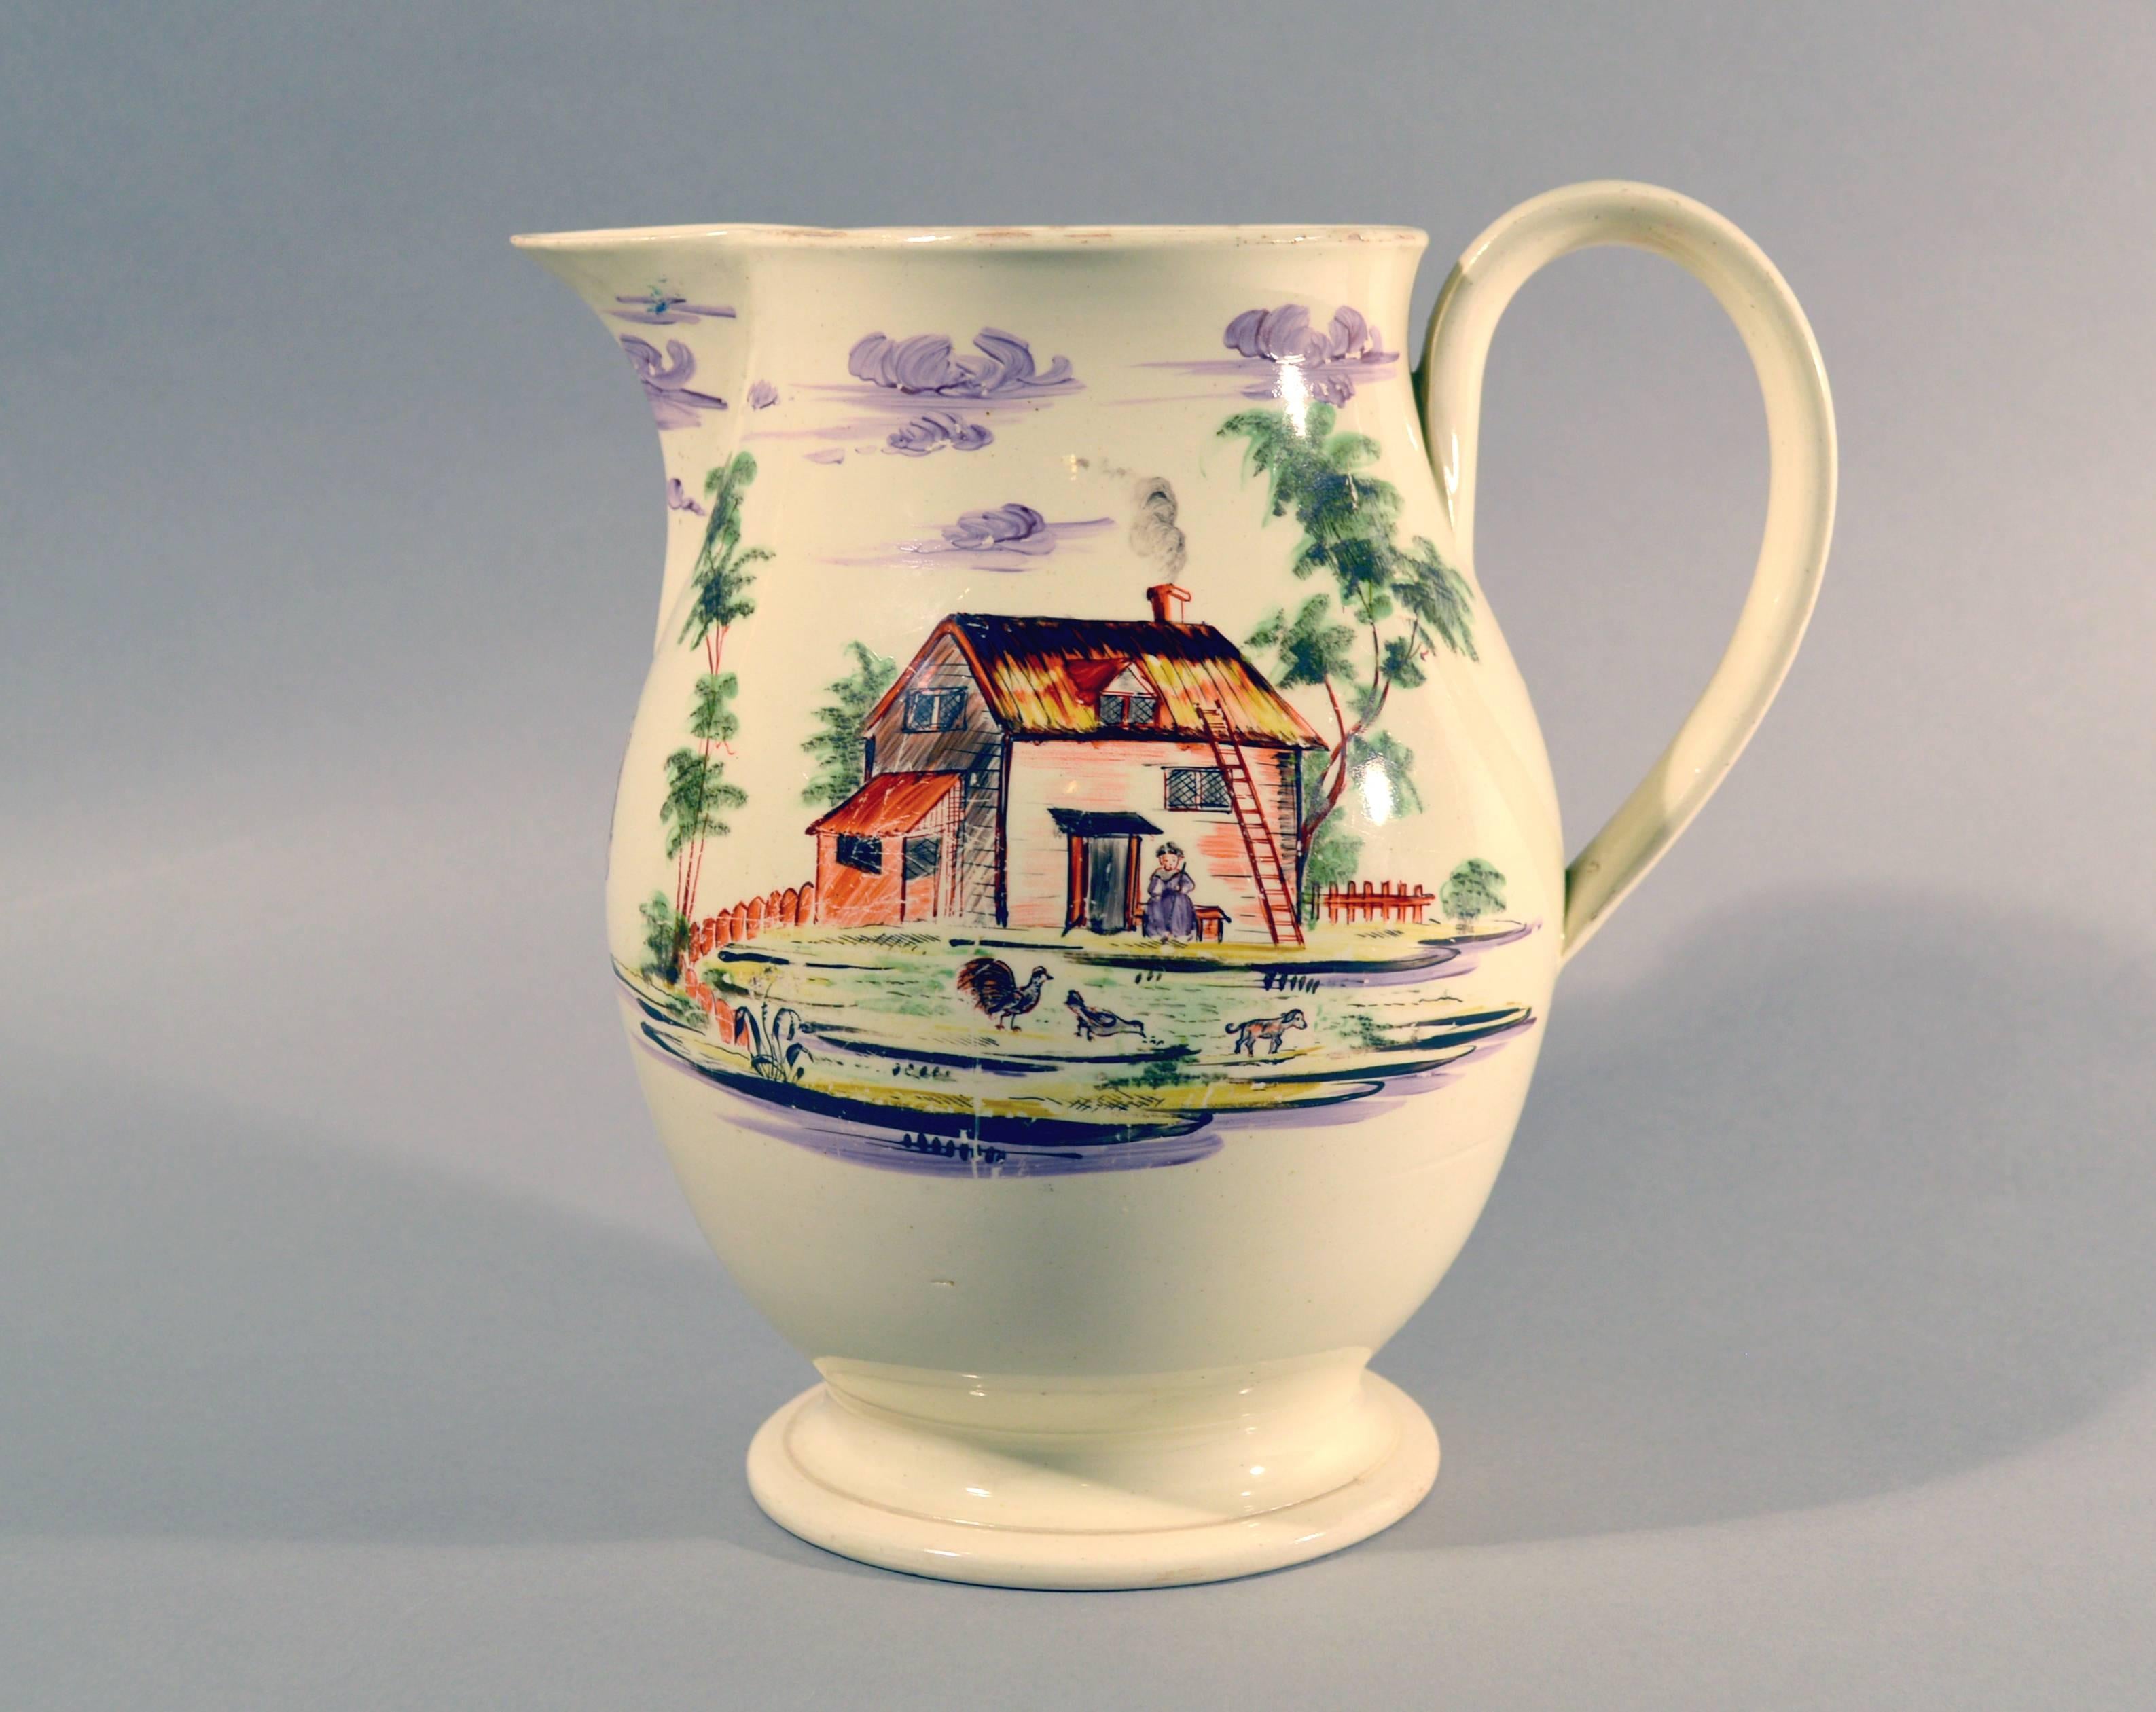 English creamware large jug decorated with farm buildings and farm animals,
Staffordshire or Yorkshire,
circa 1785.

This charming creamware pottery jug is hand-painted on each side with different rural farm scenes. To one side is a large house